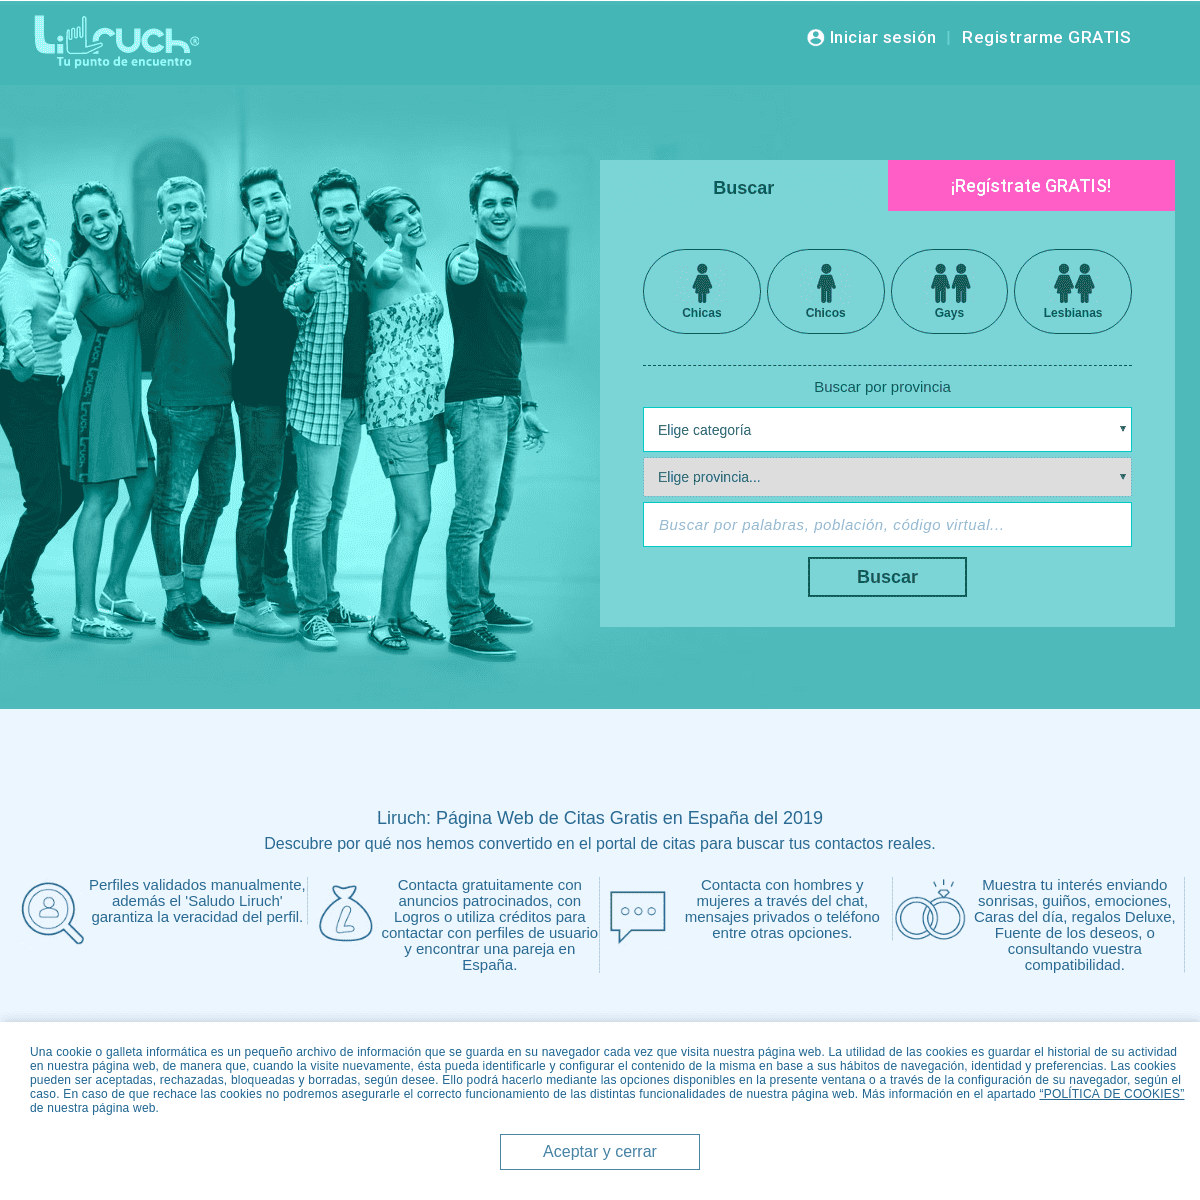 A complete backup of liruch.com